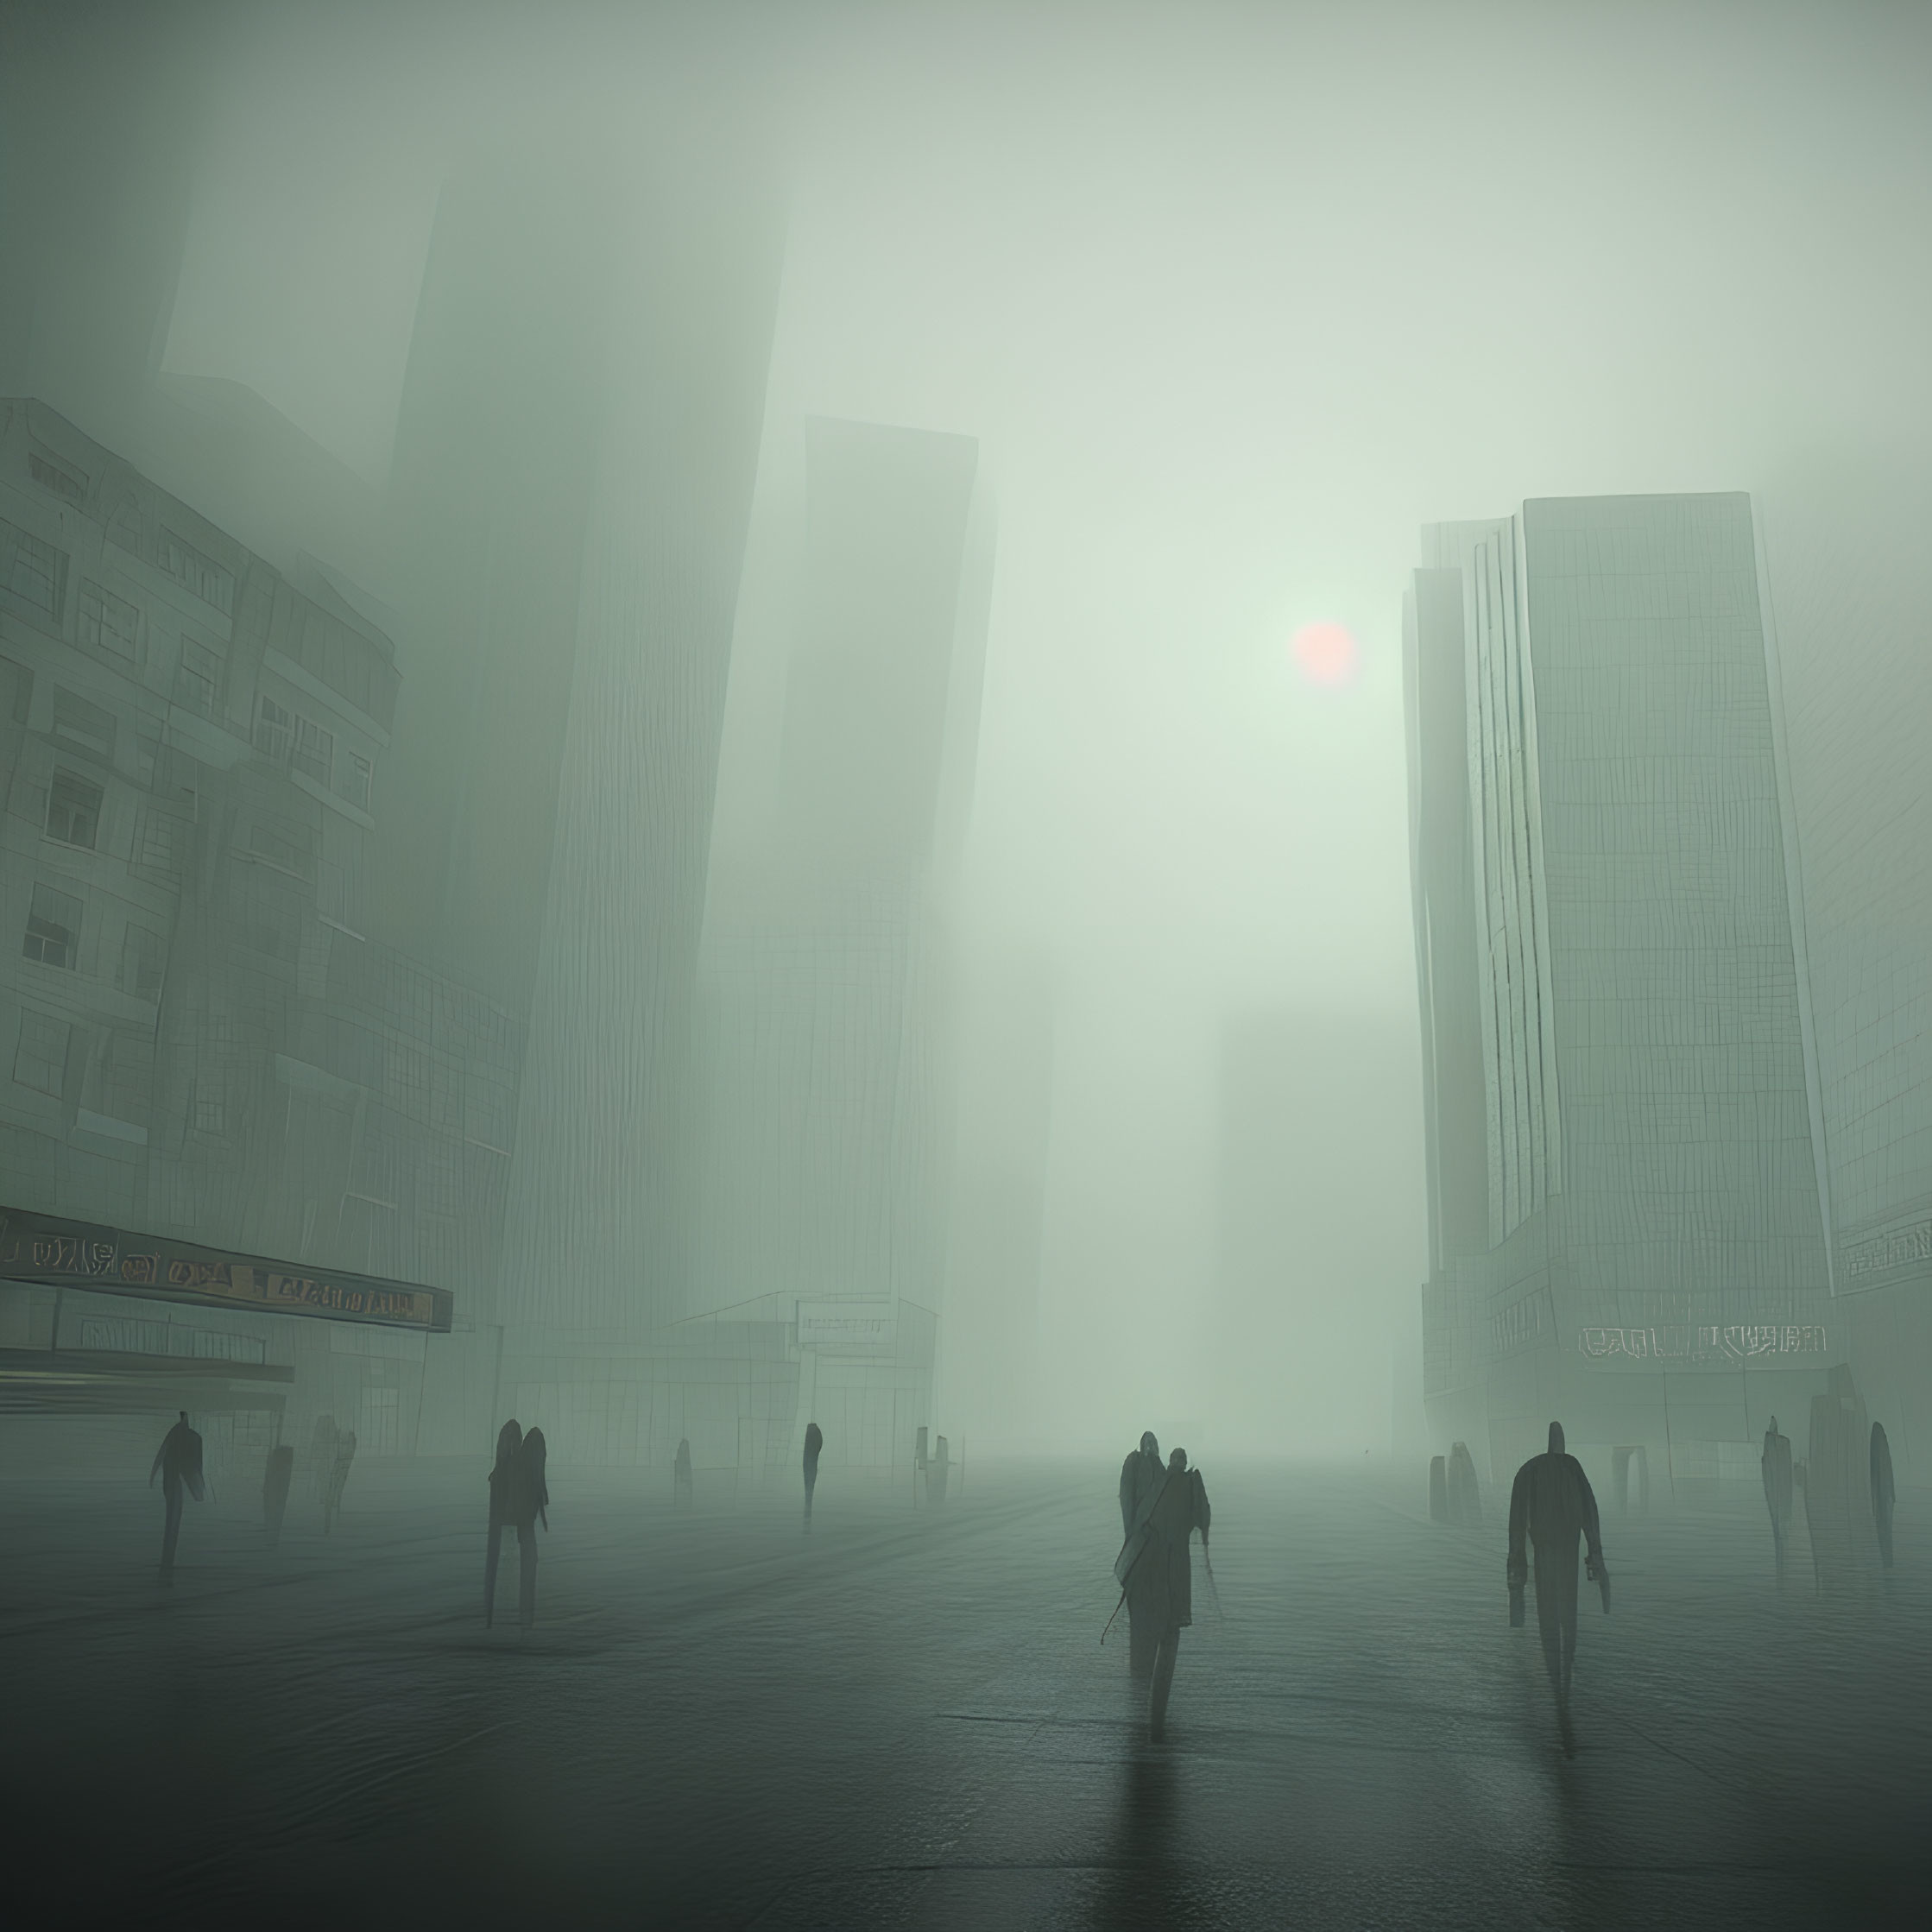 Obscured skyscrapers in misty cityscape with silhouetted figures